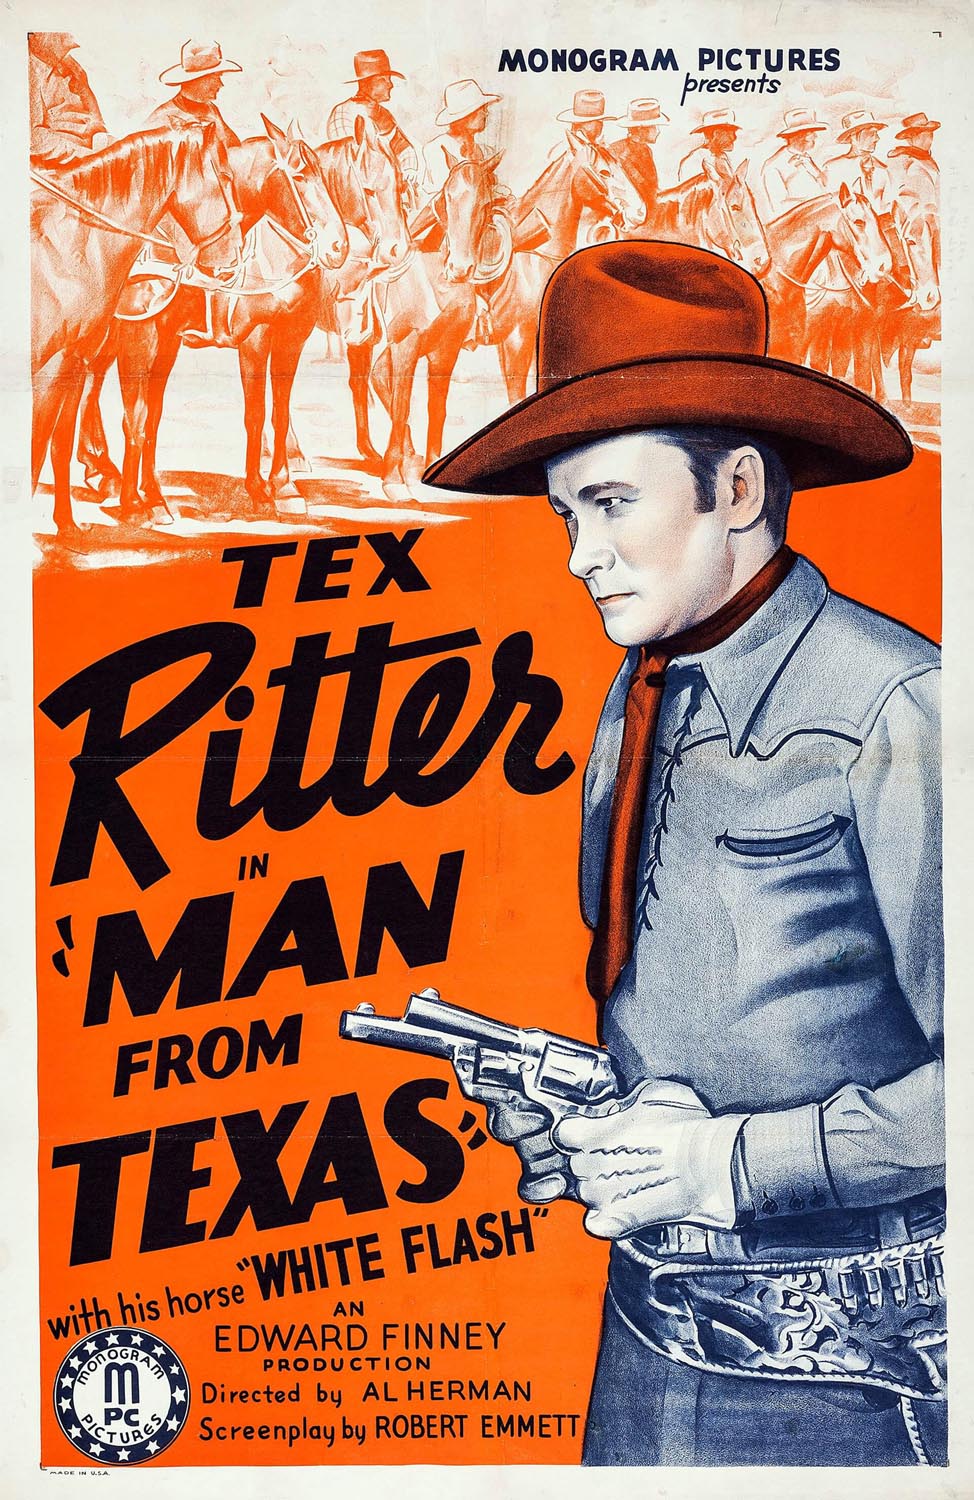 MAN FROM TEXAS